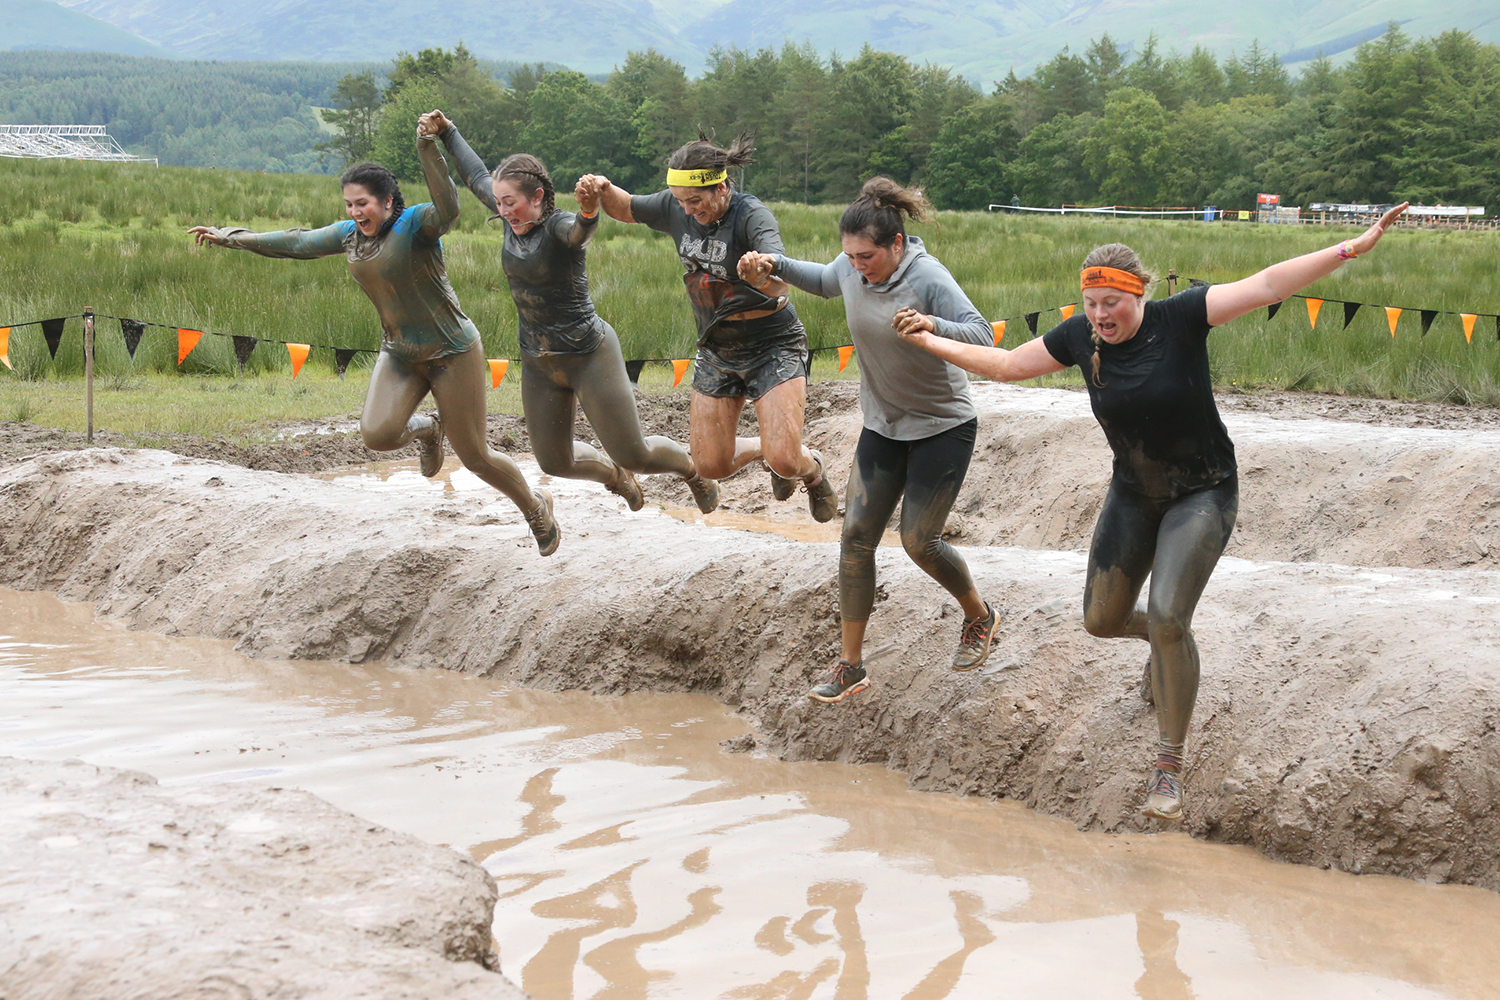 Team jumping "Mud Mile" at Tough Mudder event in Scotland.